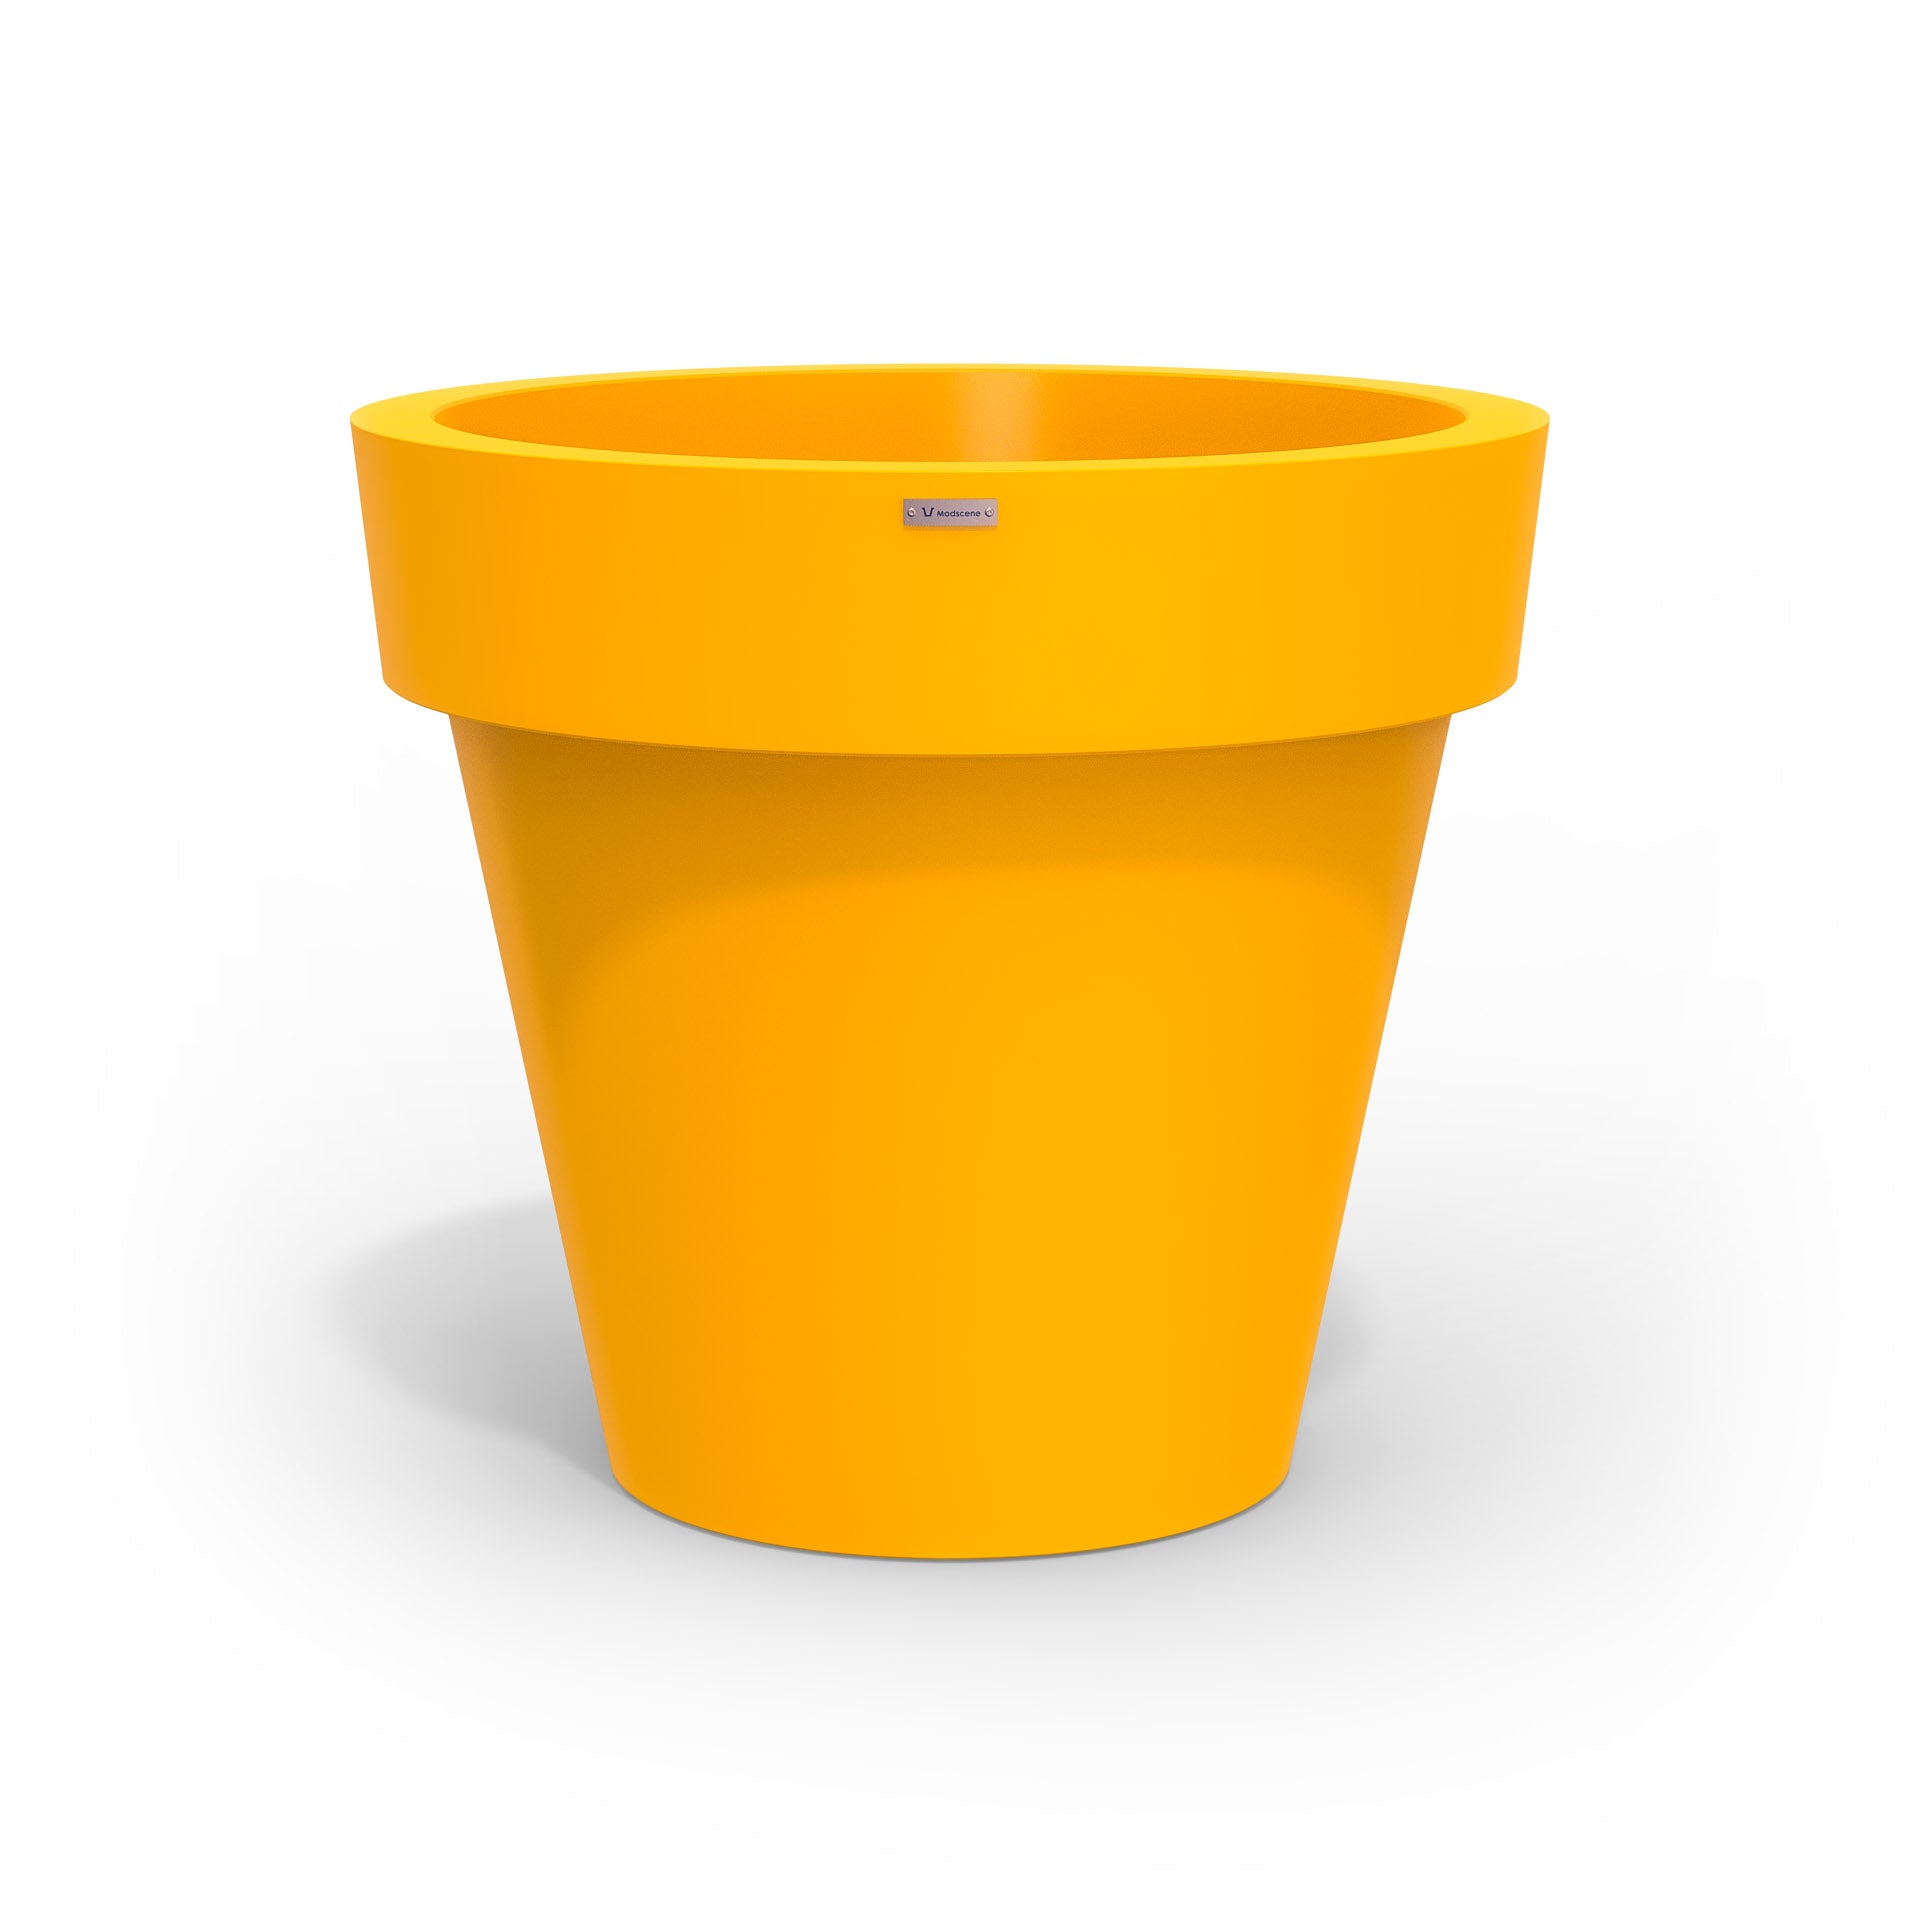 A large yellow planter pot made by Modscene New Zealand.